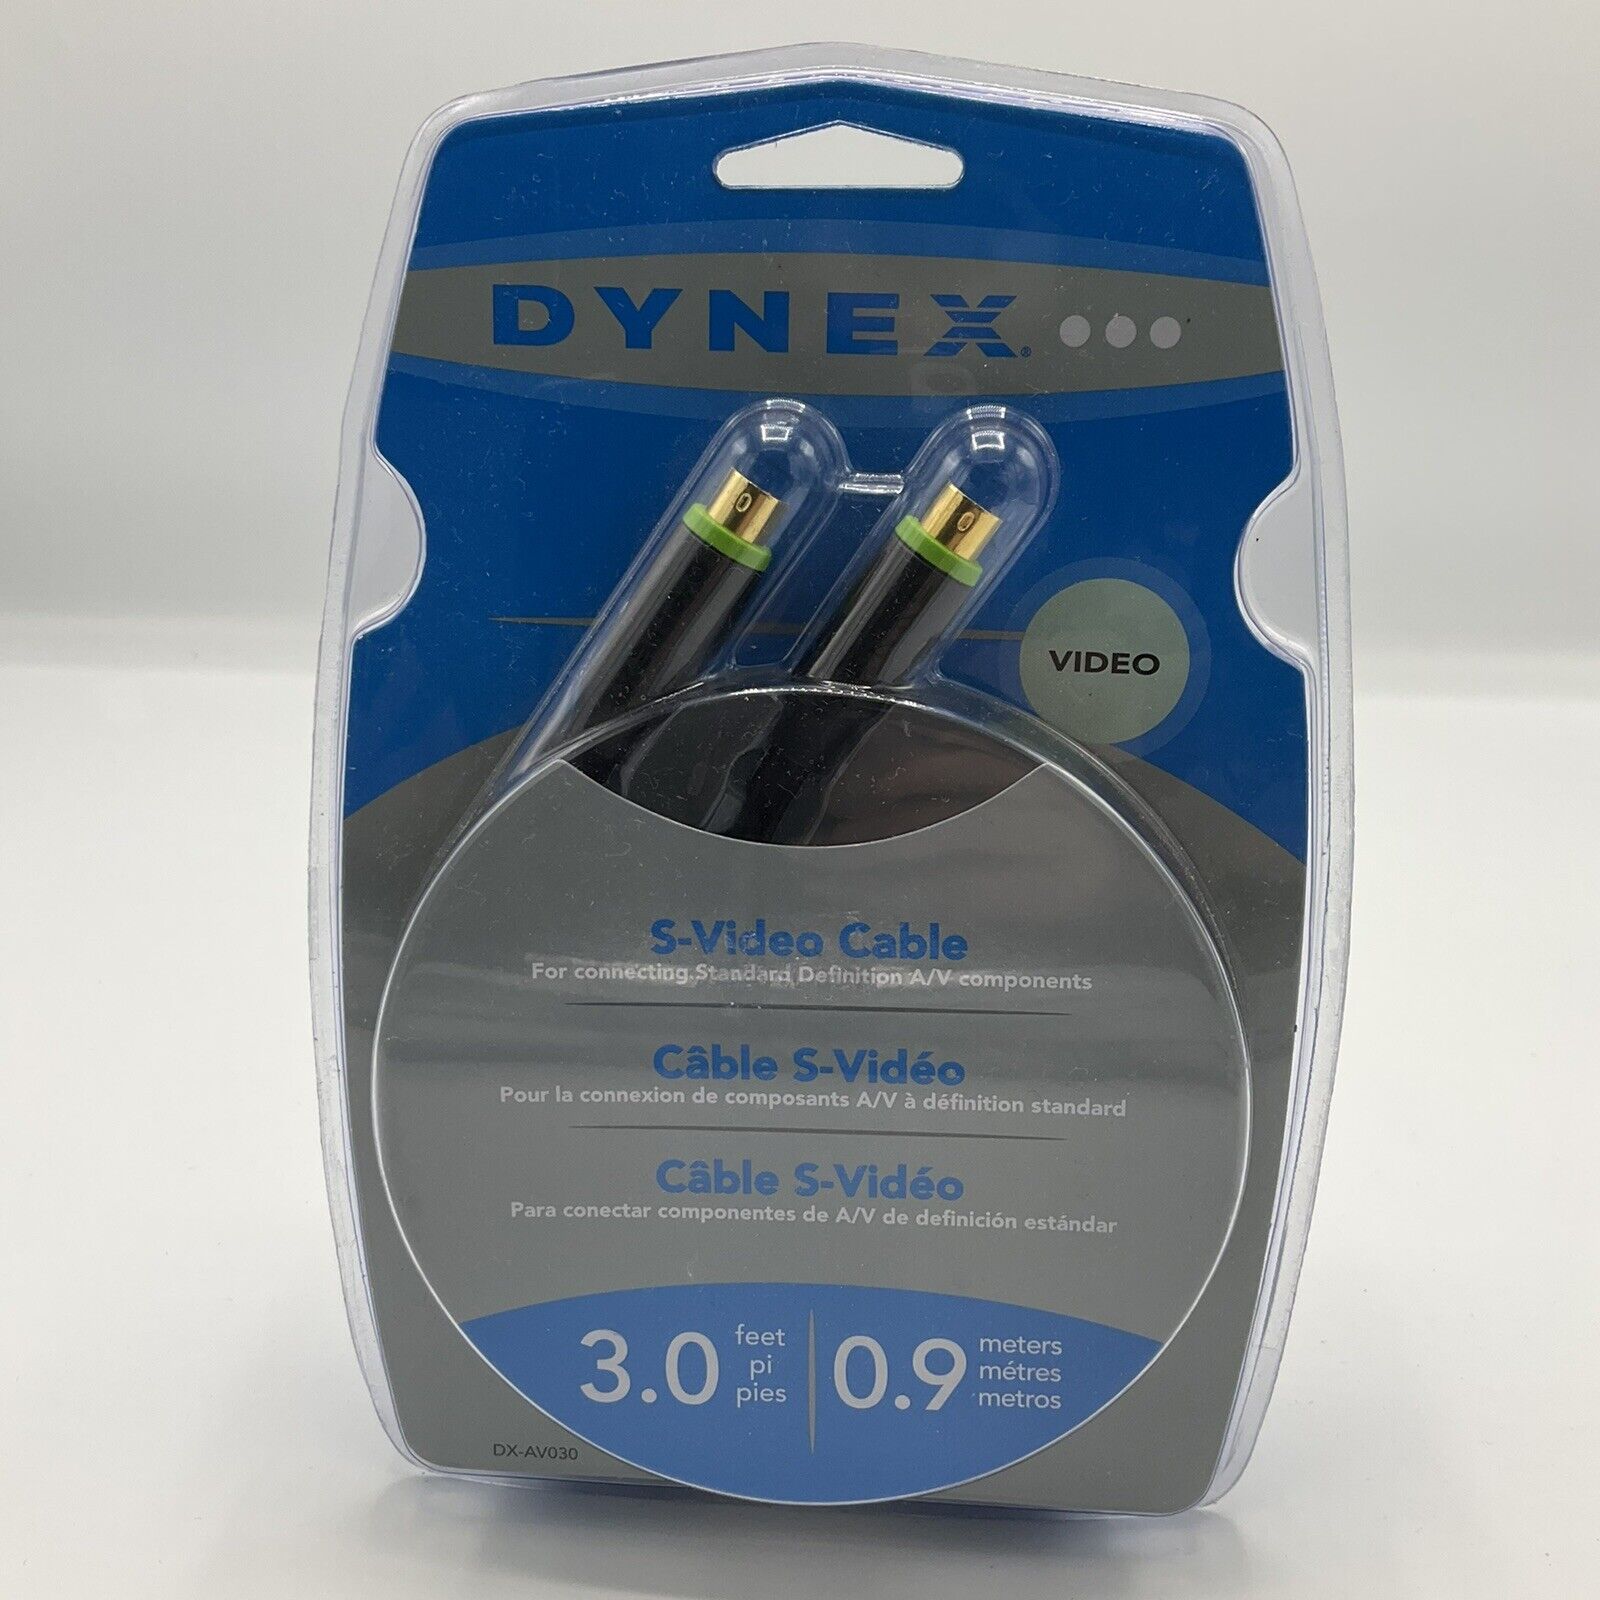 Sealed - Dynex S-Video Cable DX-AV030 3.0 Feet 0.9 Meters - New